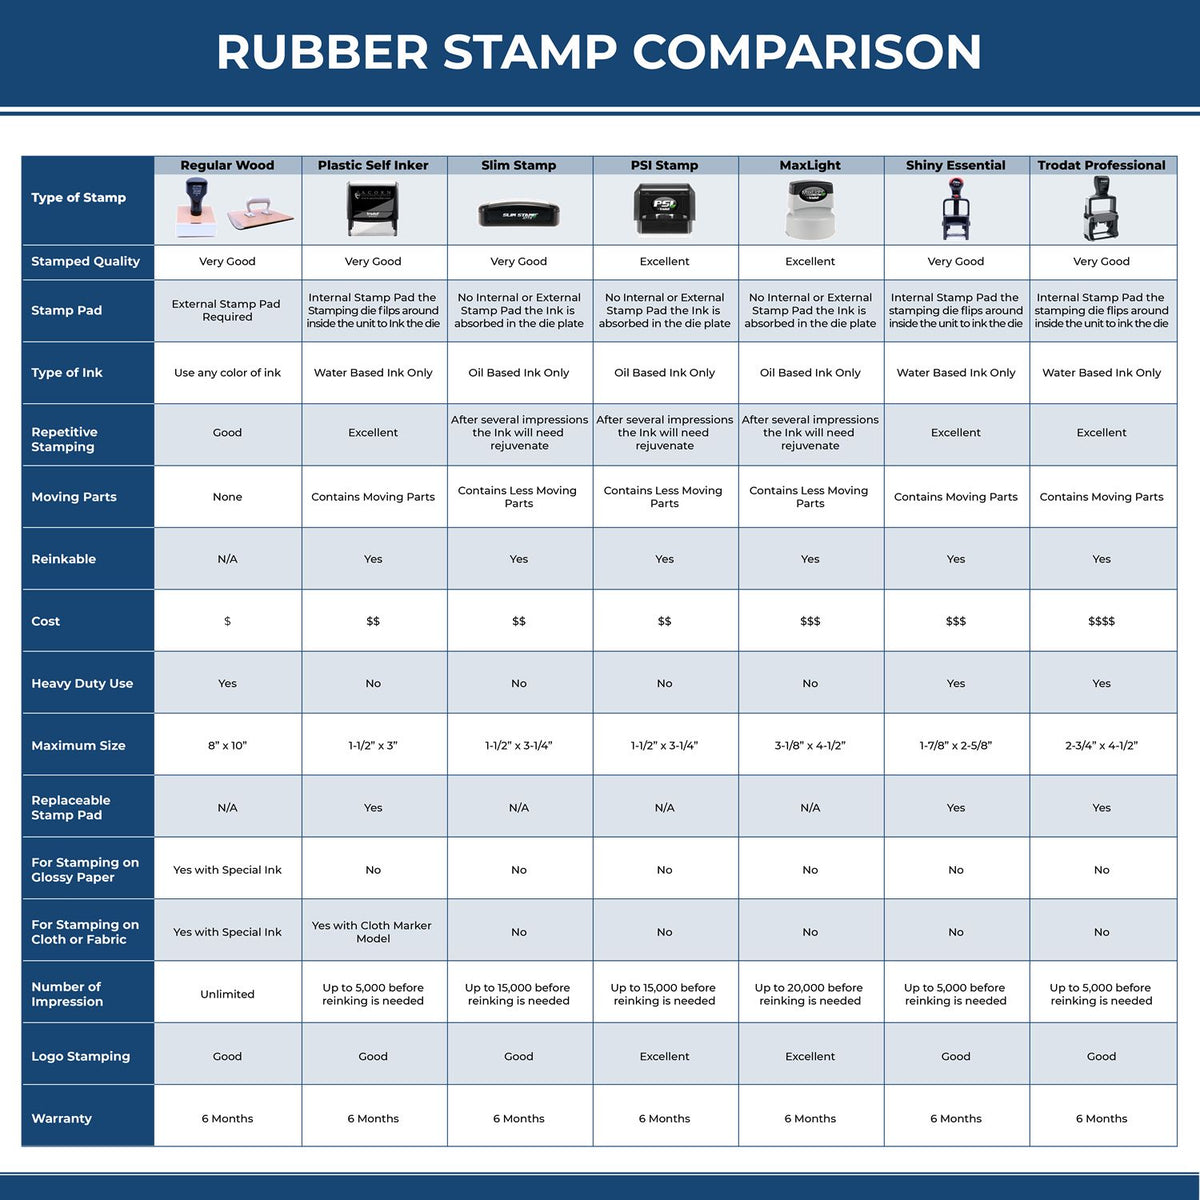 Large Self-Inking Printed Matter Stamp 4912S Rubber Stamp Comparison